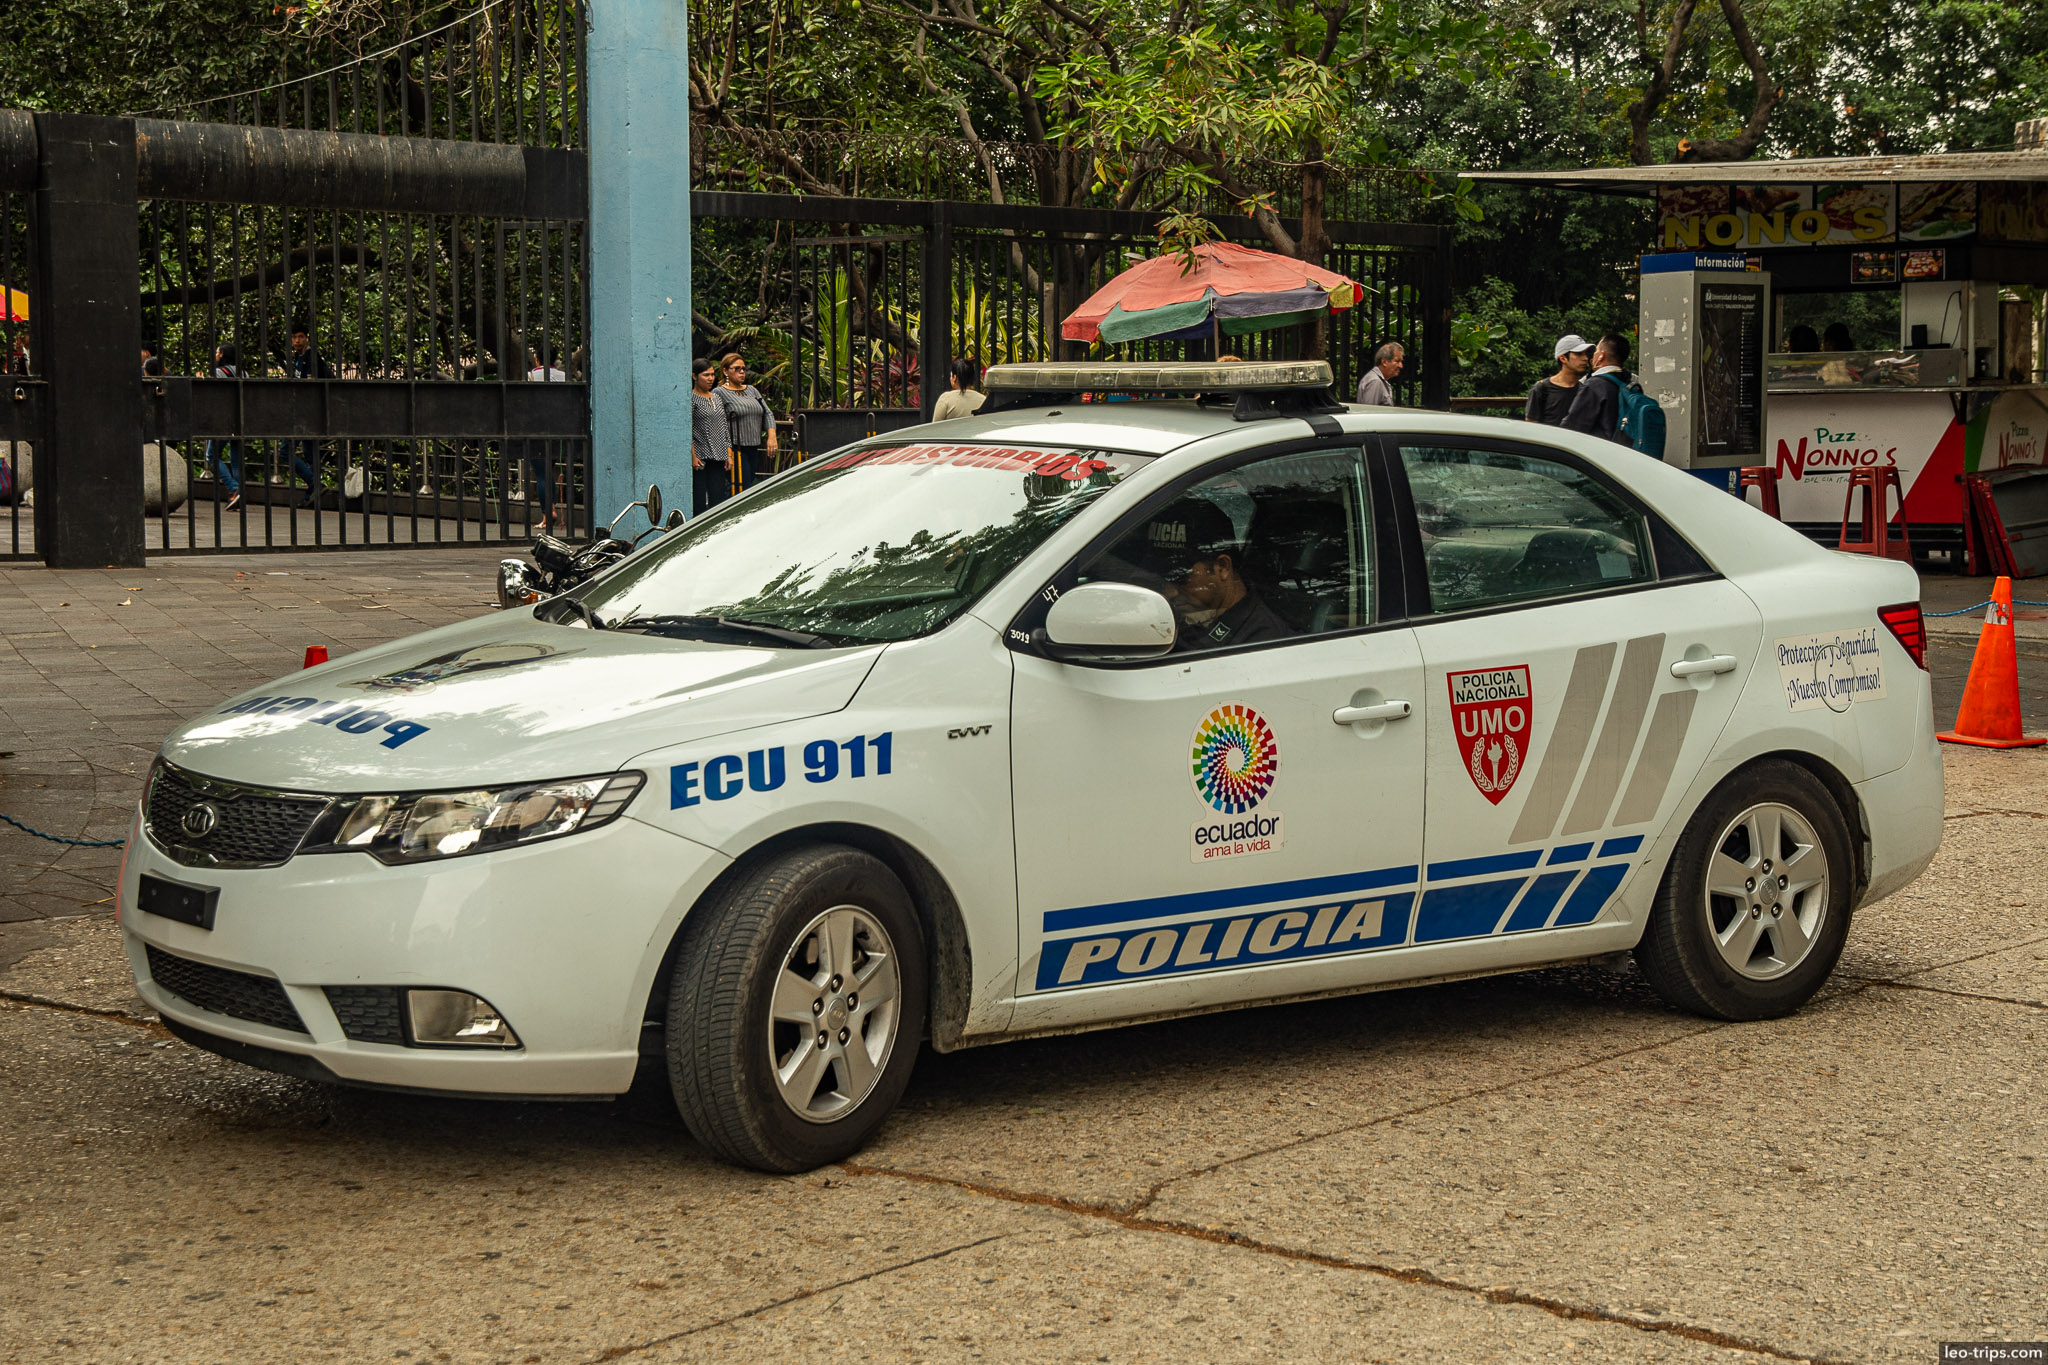 Guayaquil police car guayaquil